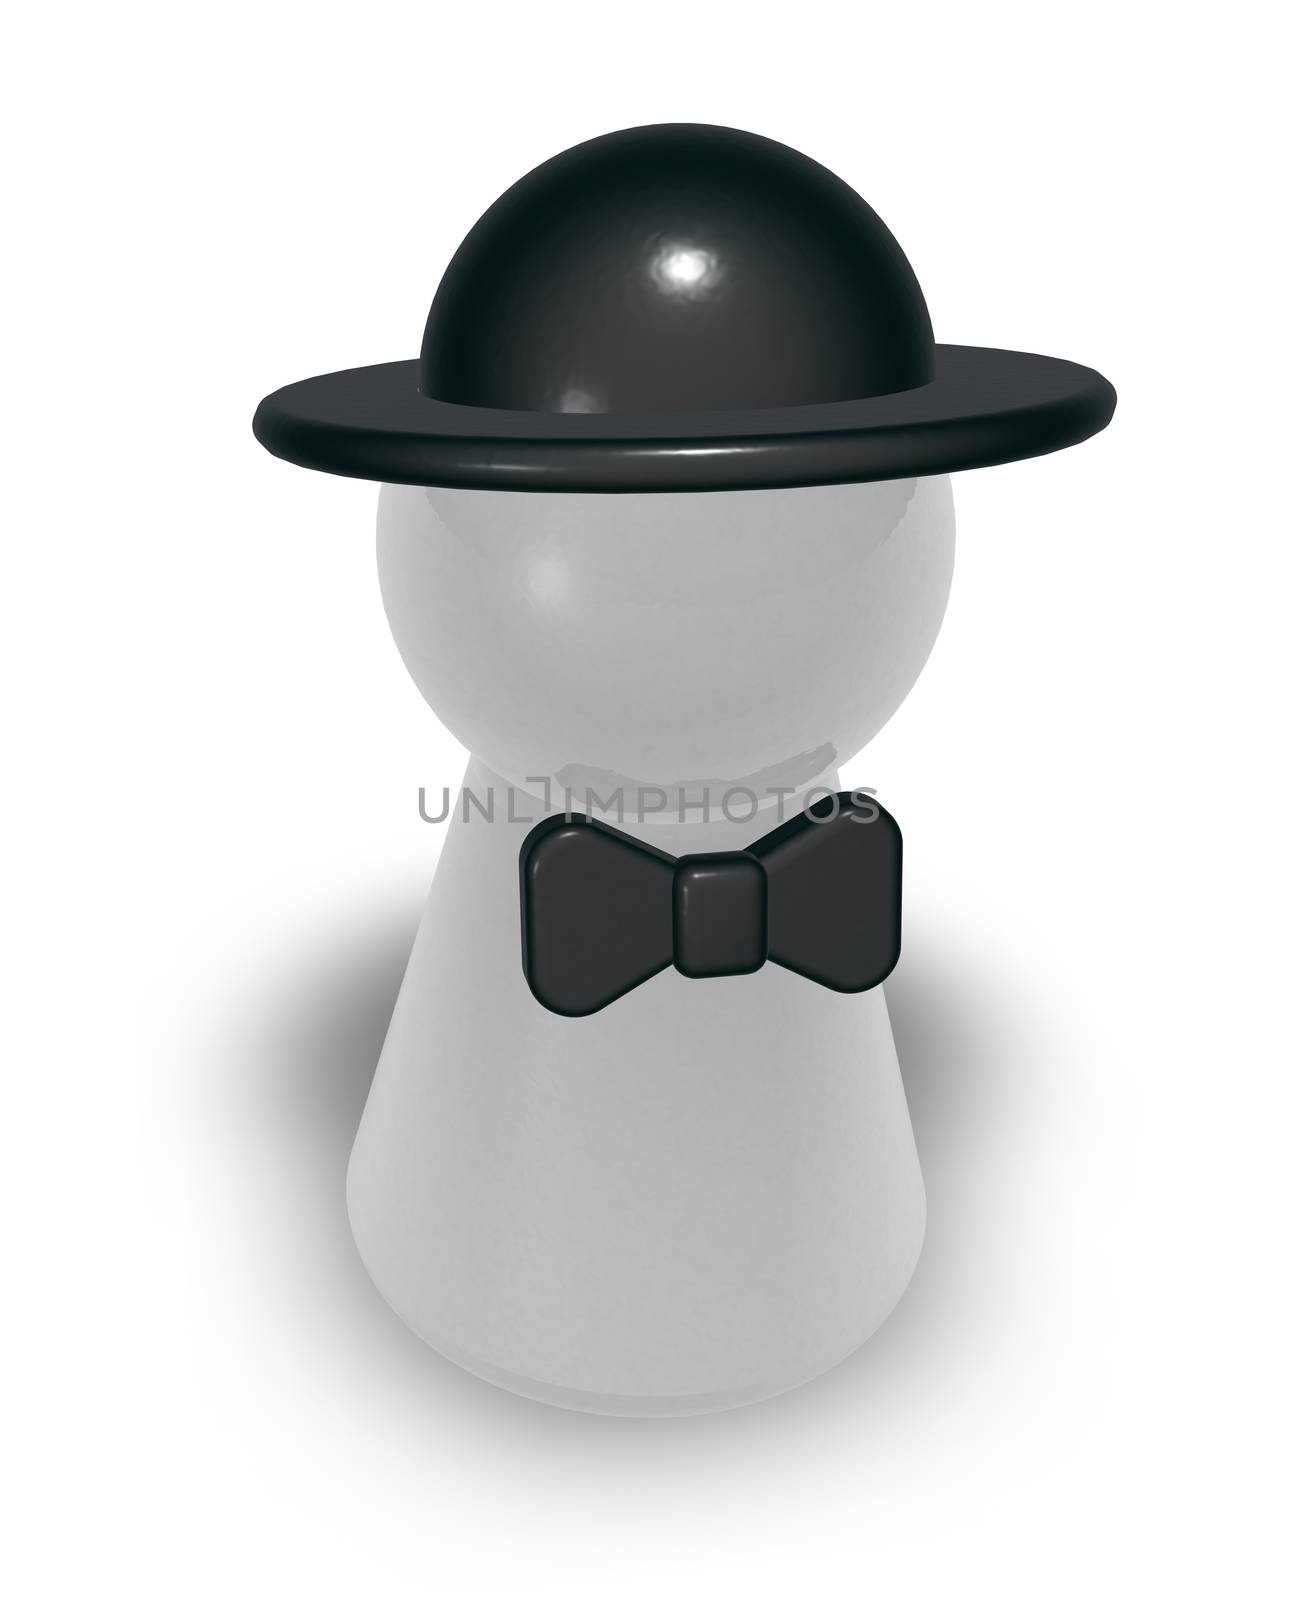 play figure with bow and hat - 3d illustration